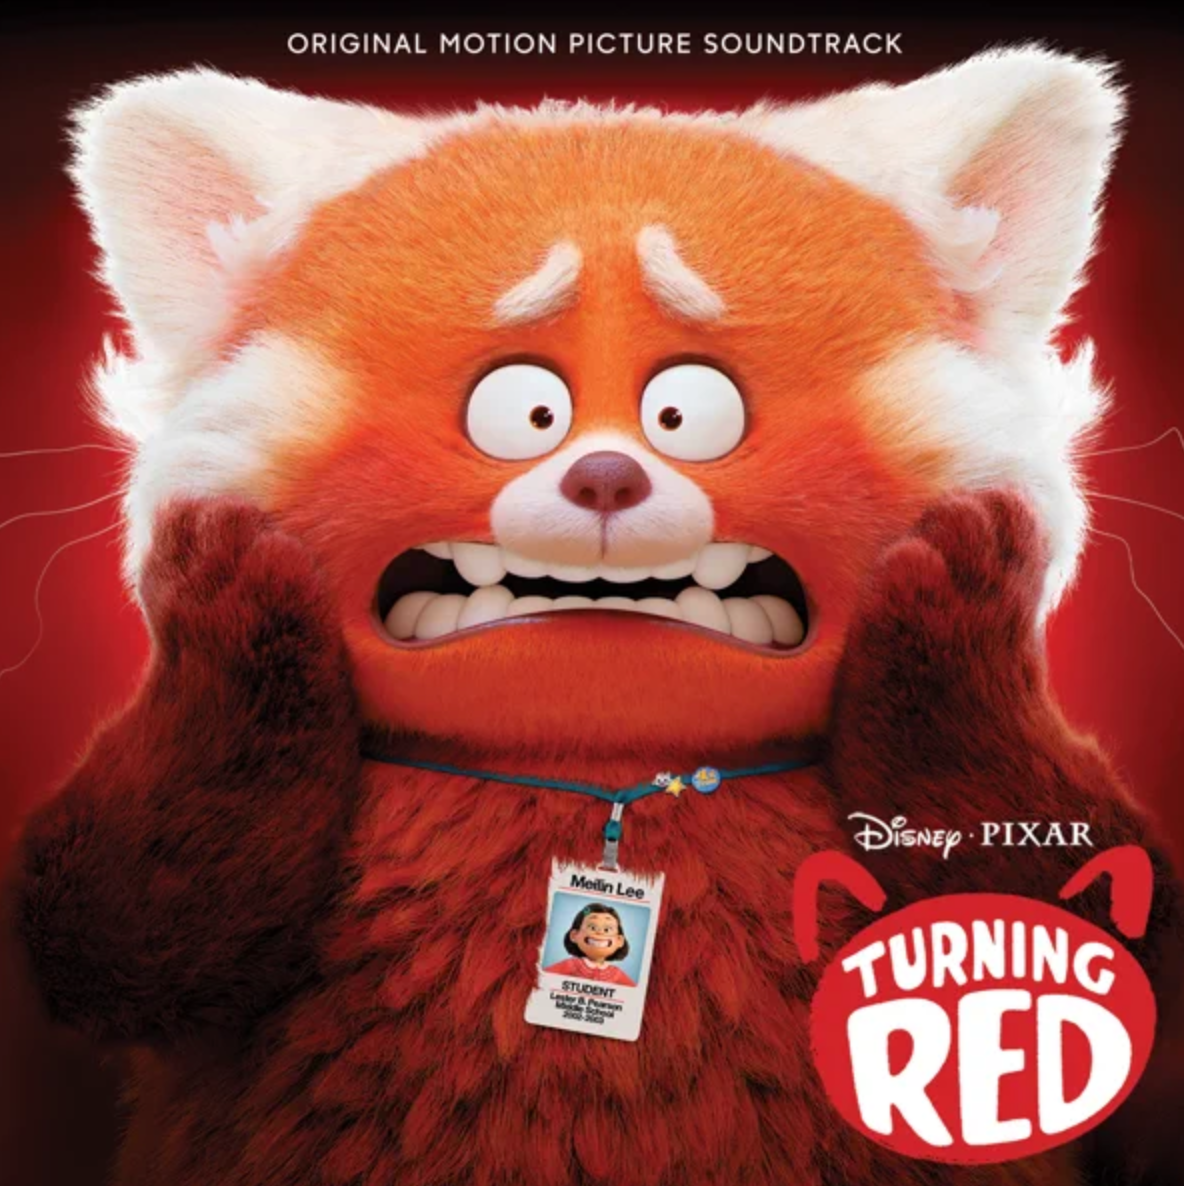 Pixar's new Turning Red trailer puts a fuzzy spin on coming-of-age